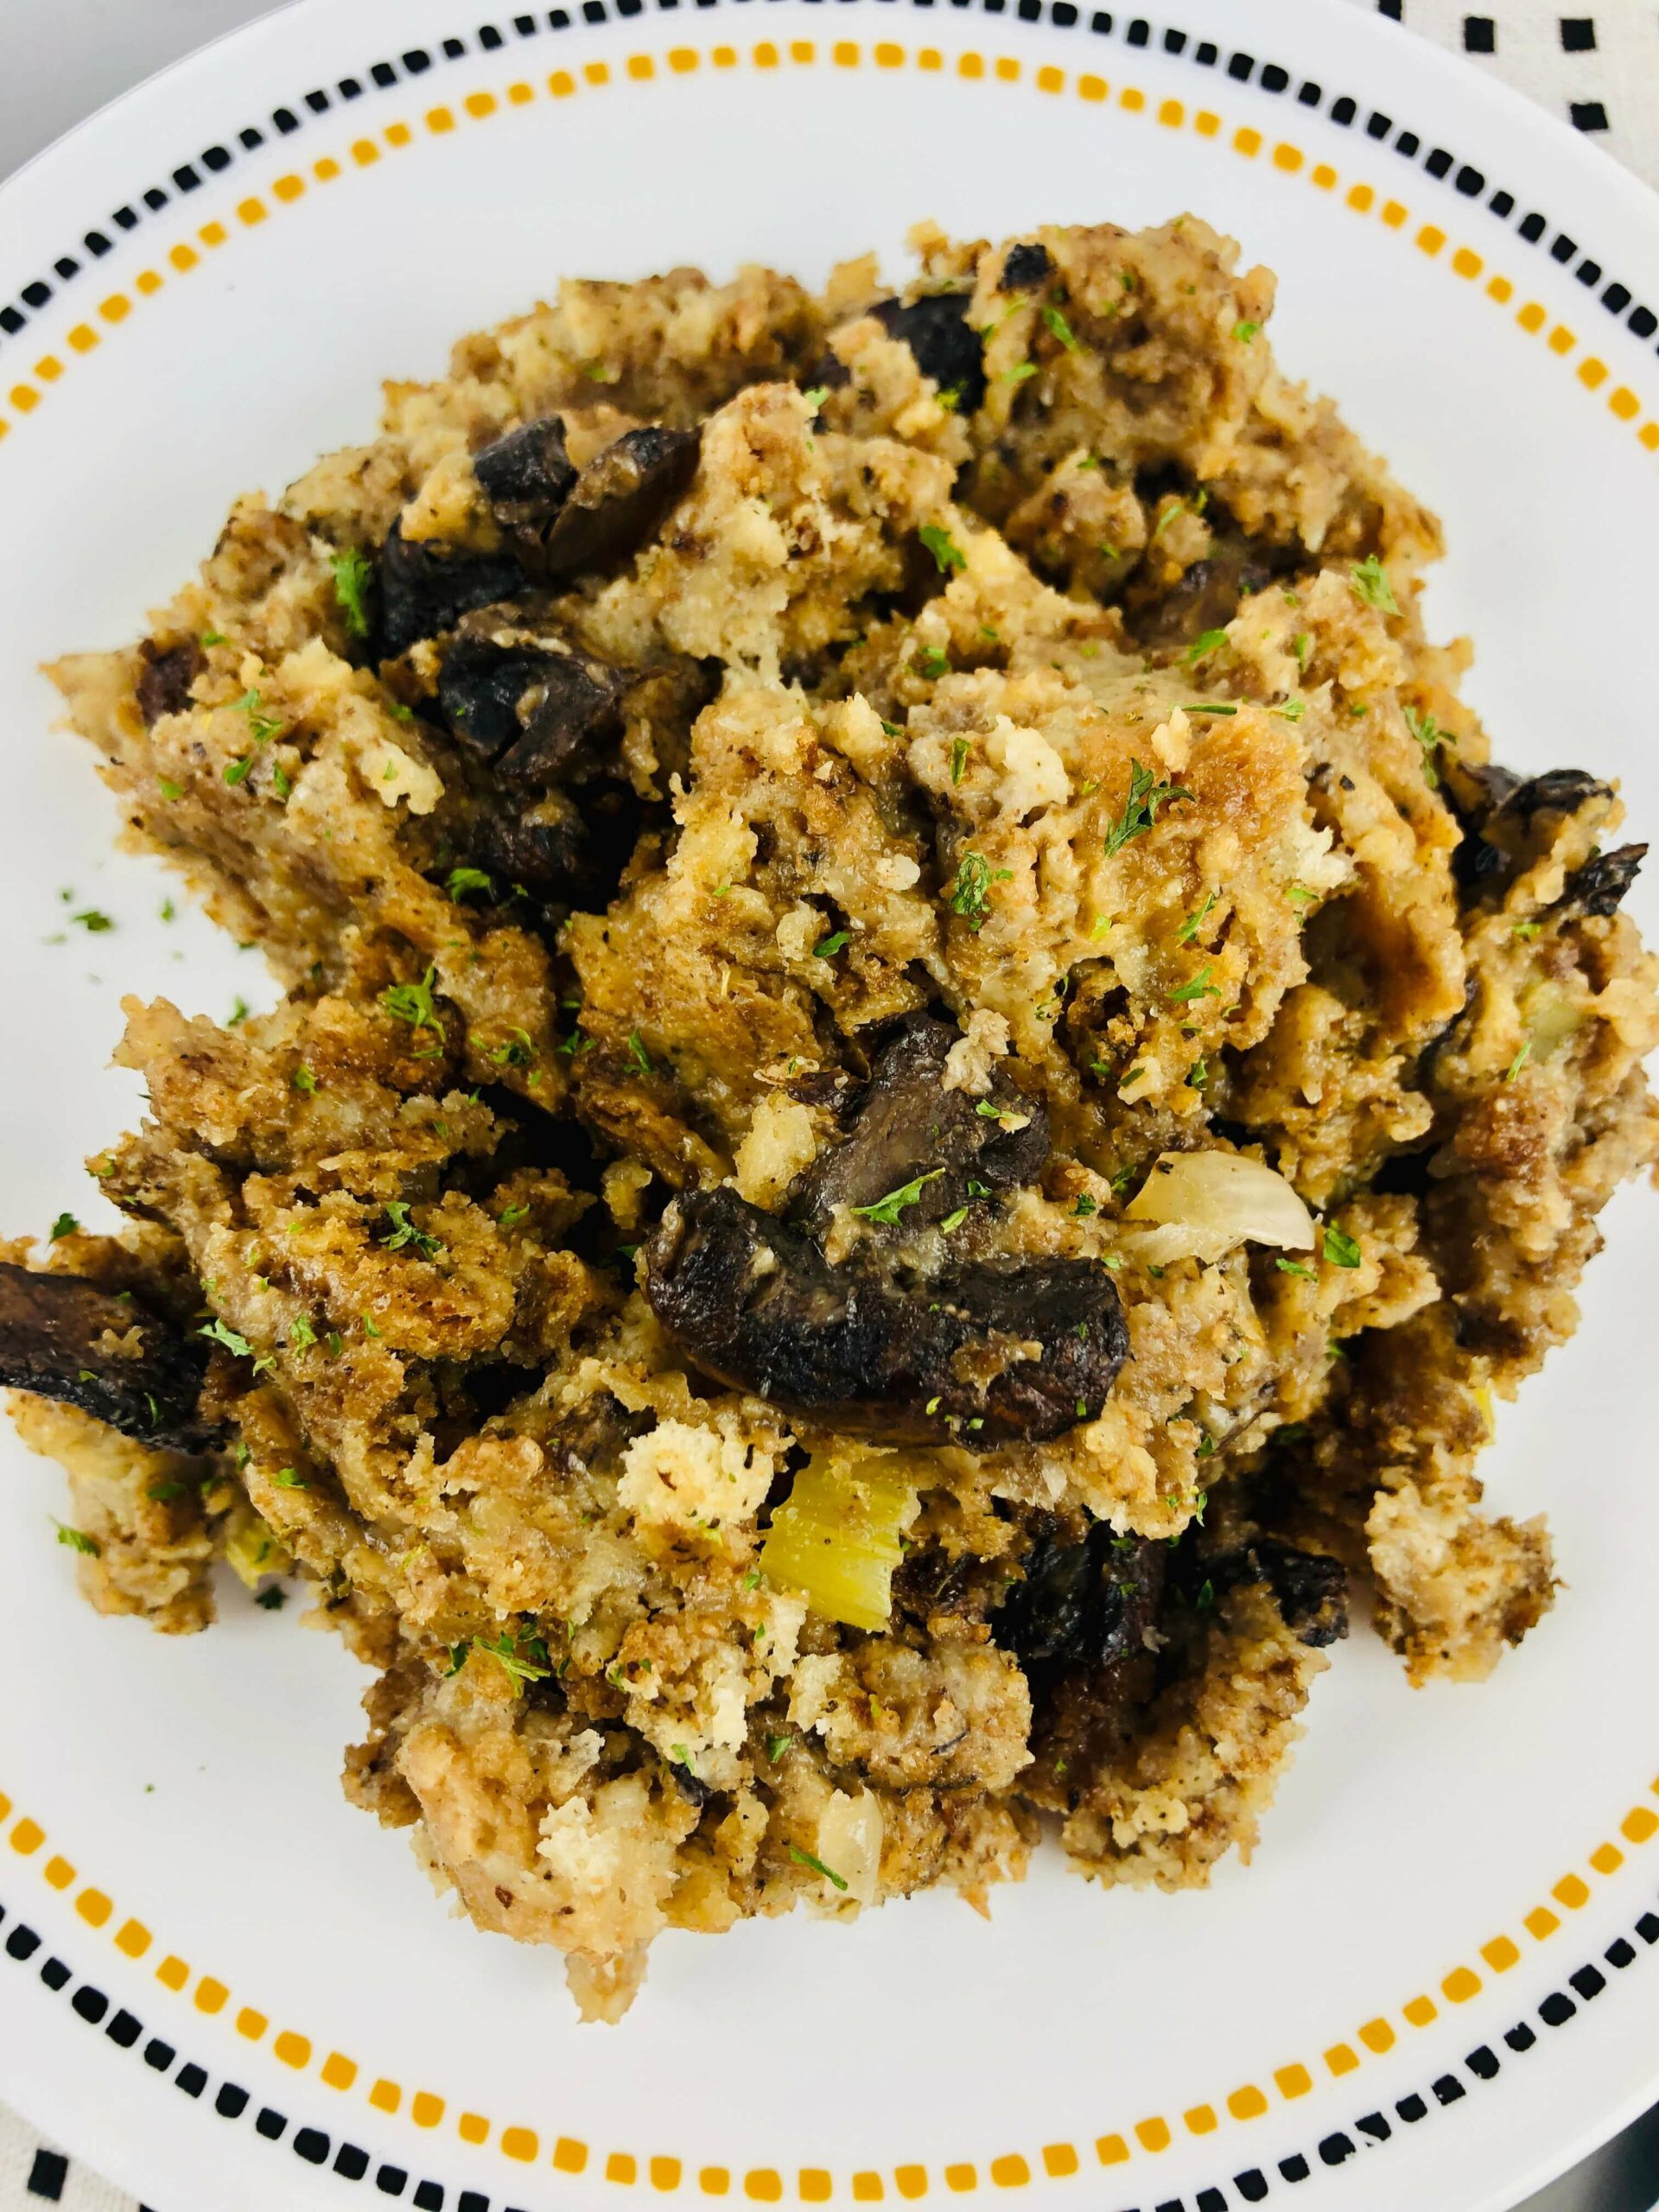 A bowl of the finished stuffing with mushrooms.